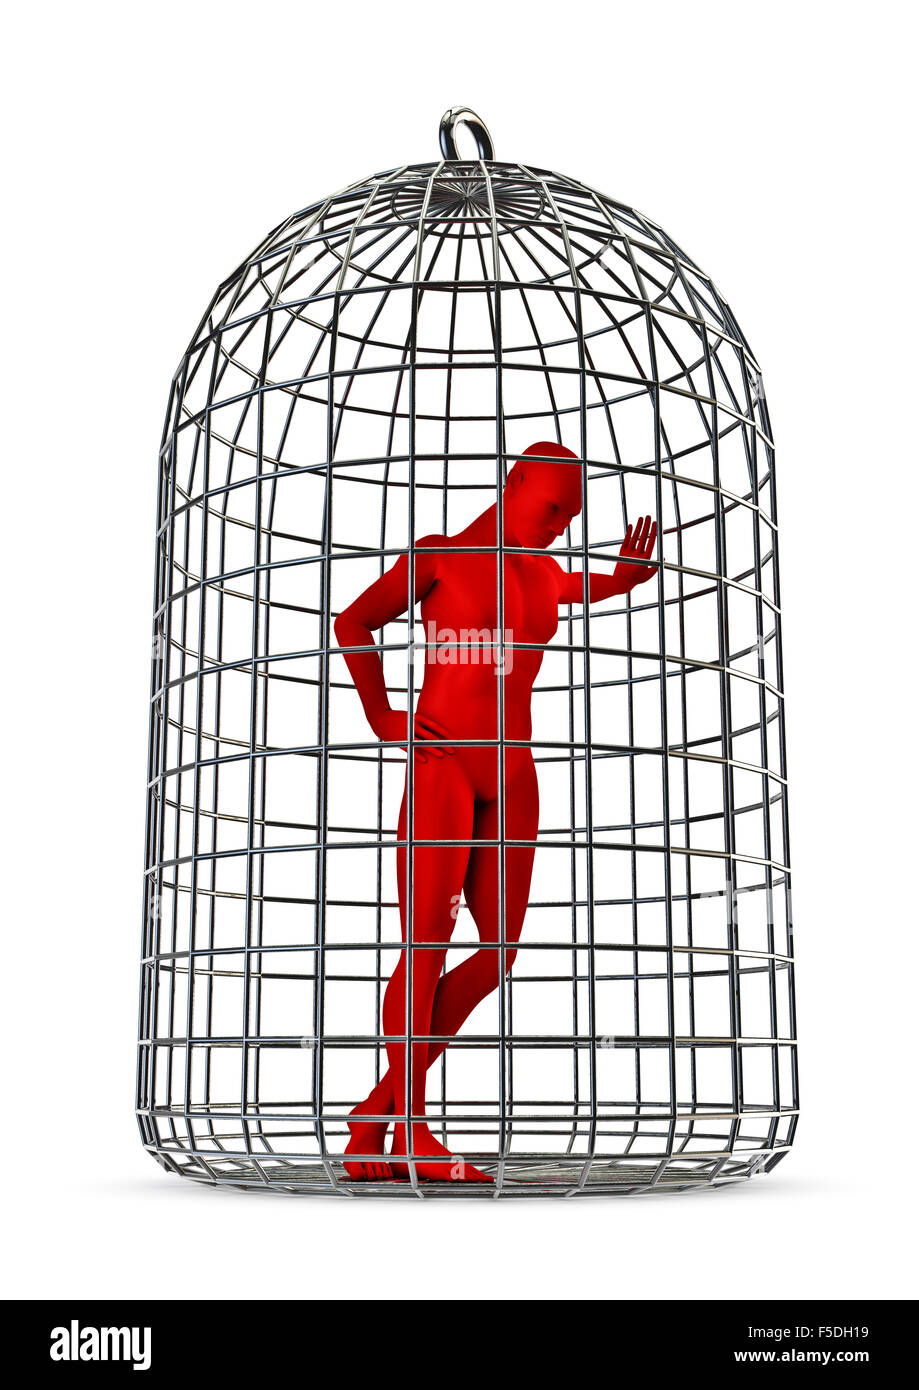 Jailbird / 3D render of male figure trapped in birdcage Stock Photo